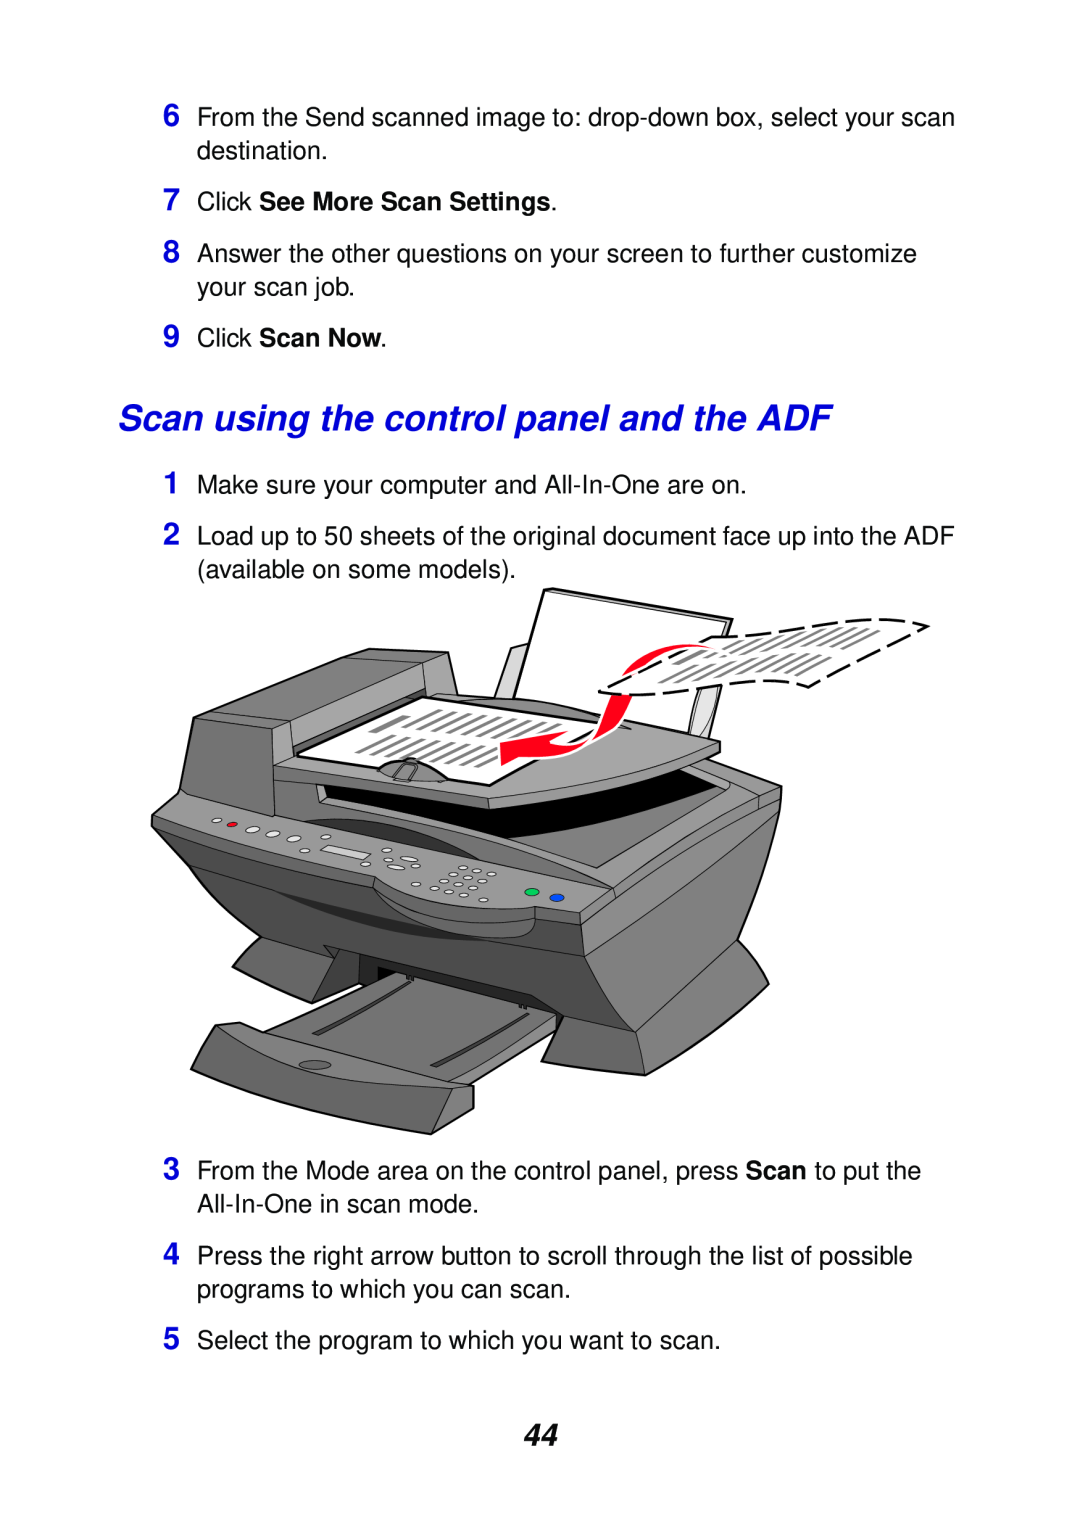 Lexmark X6100 manual Scan using the control panel and the ADF, 7Click See More Scan Settings, 9Click Scan Now 